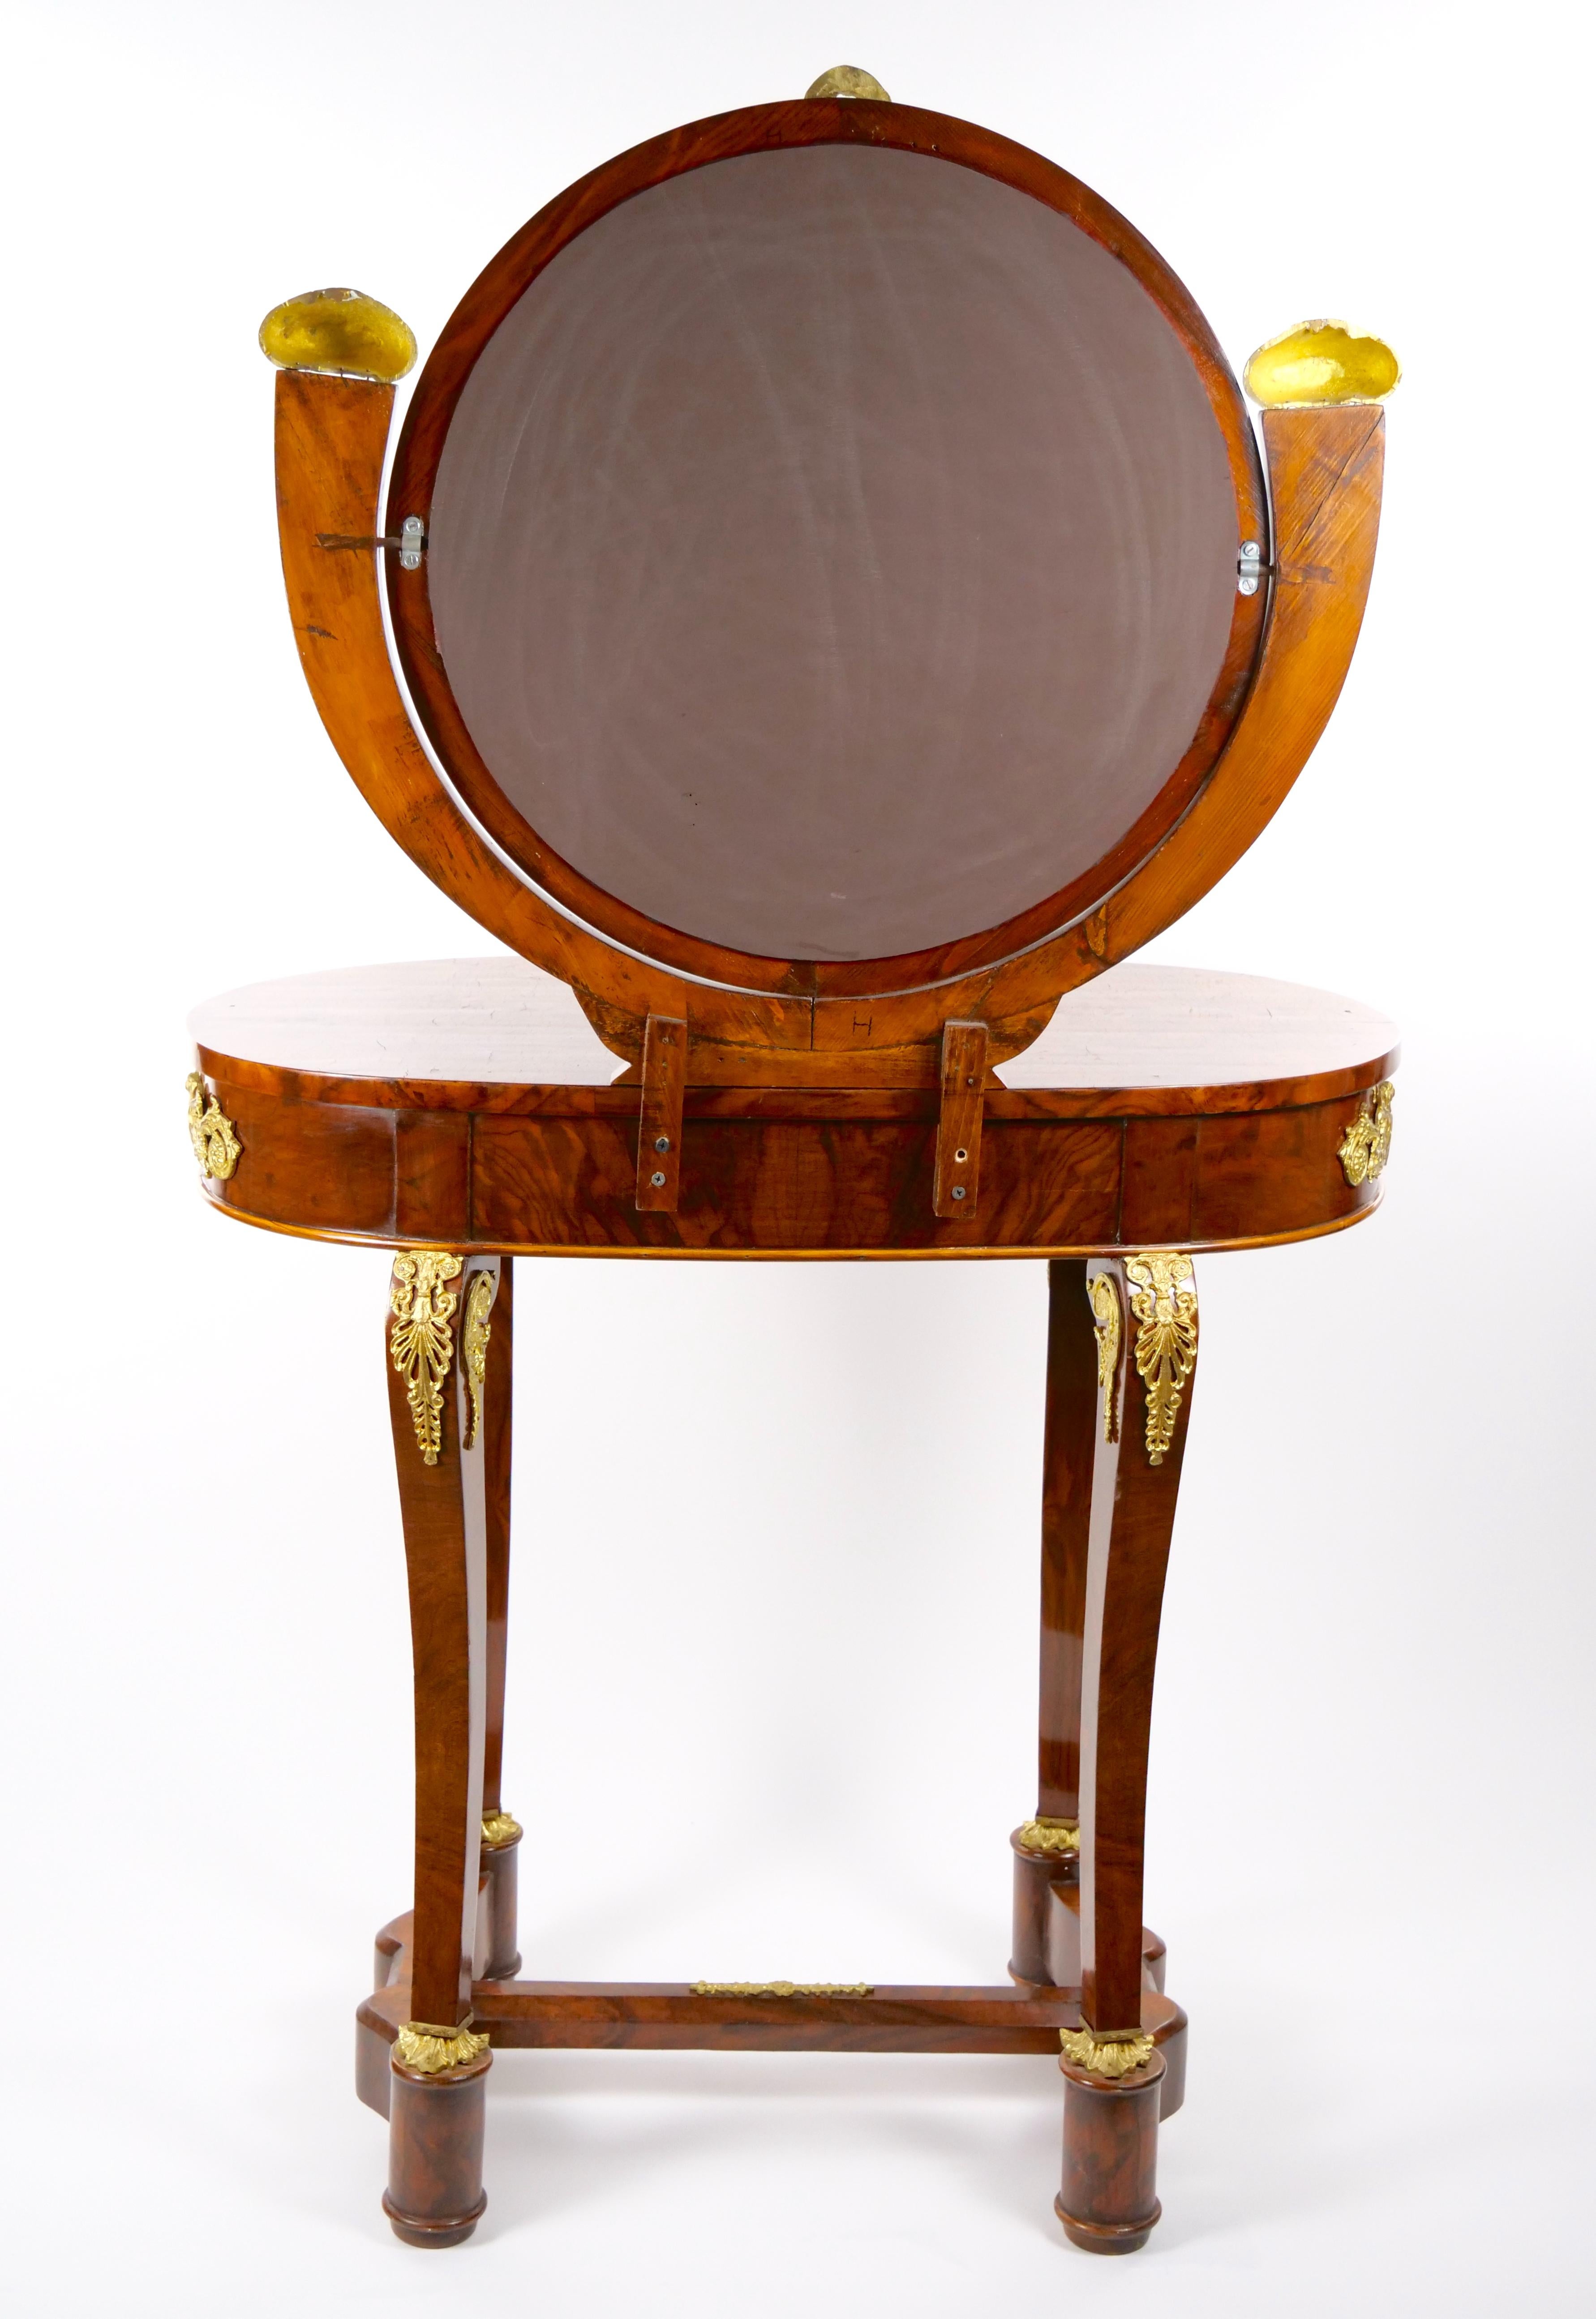 19th Century French Neoclassical Mahogany Vanity / Ormolu Mounts For Sale 7